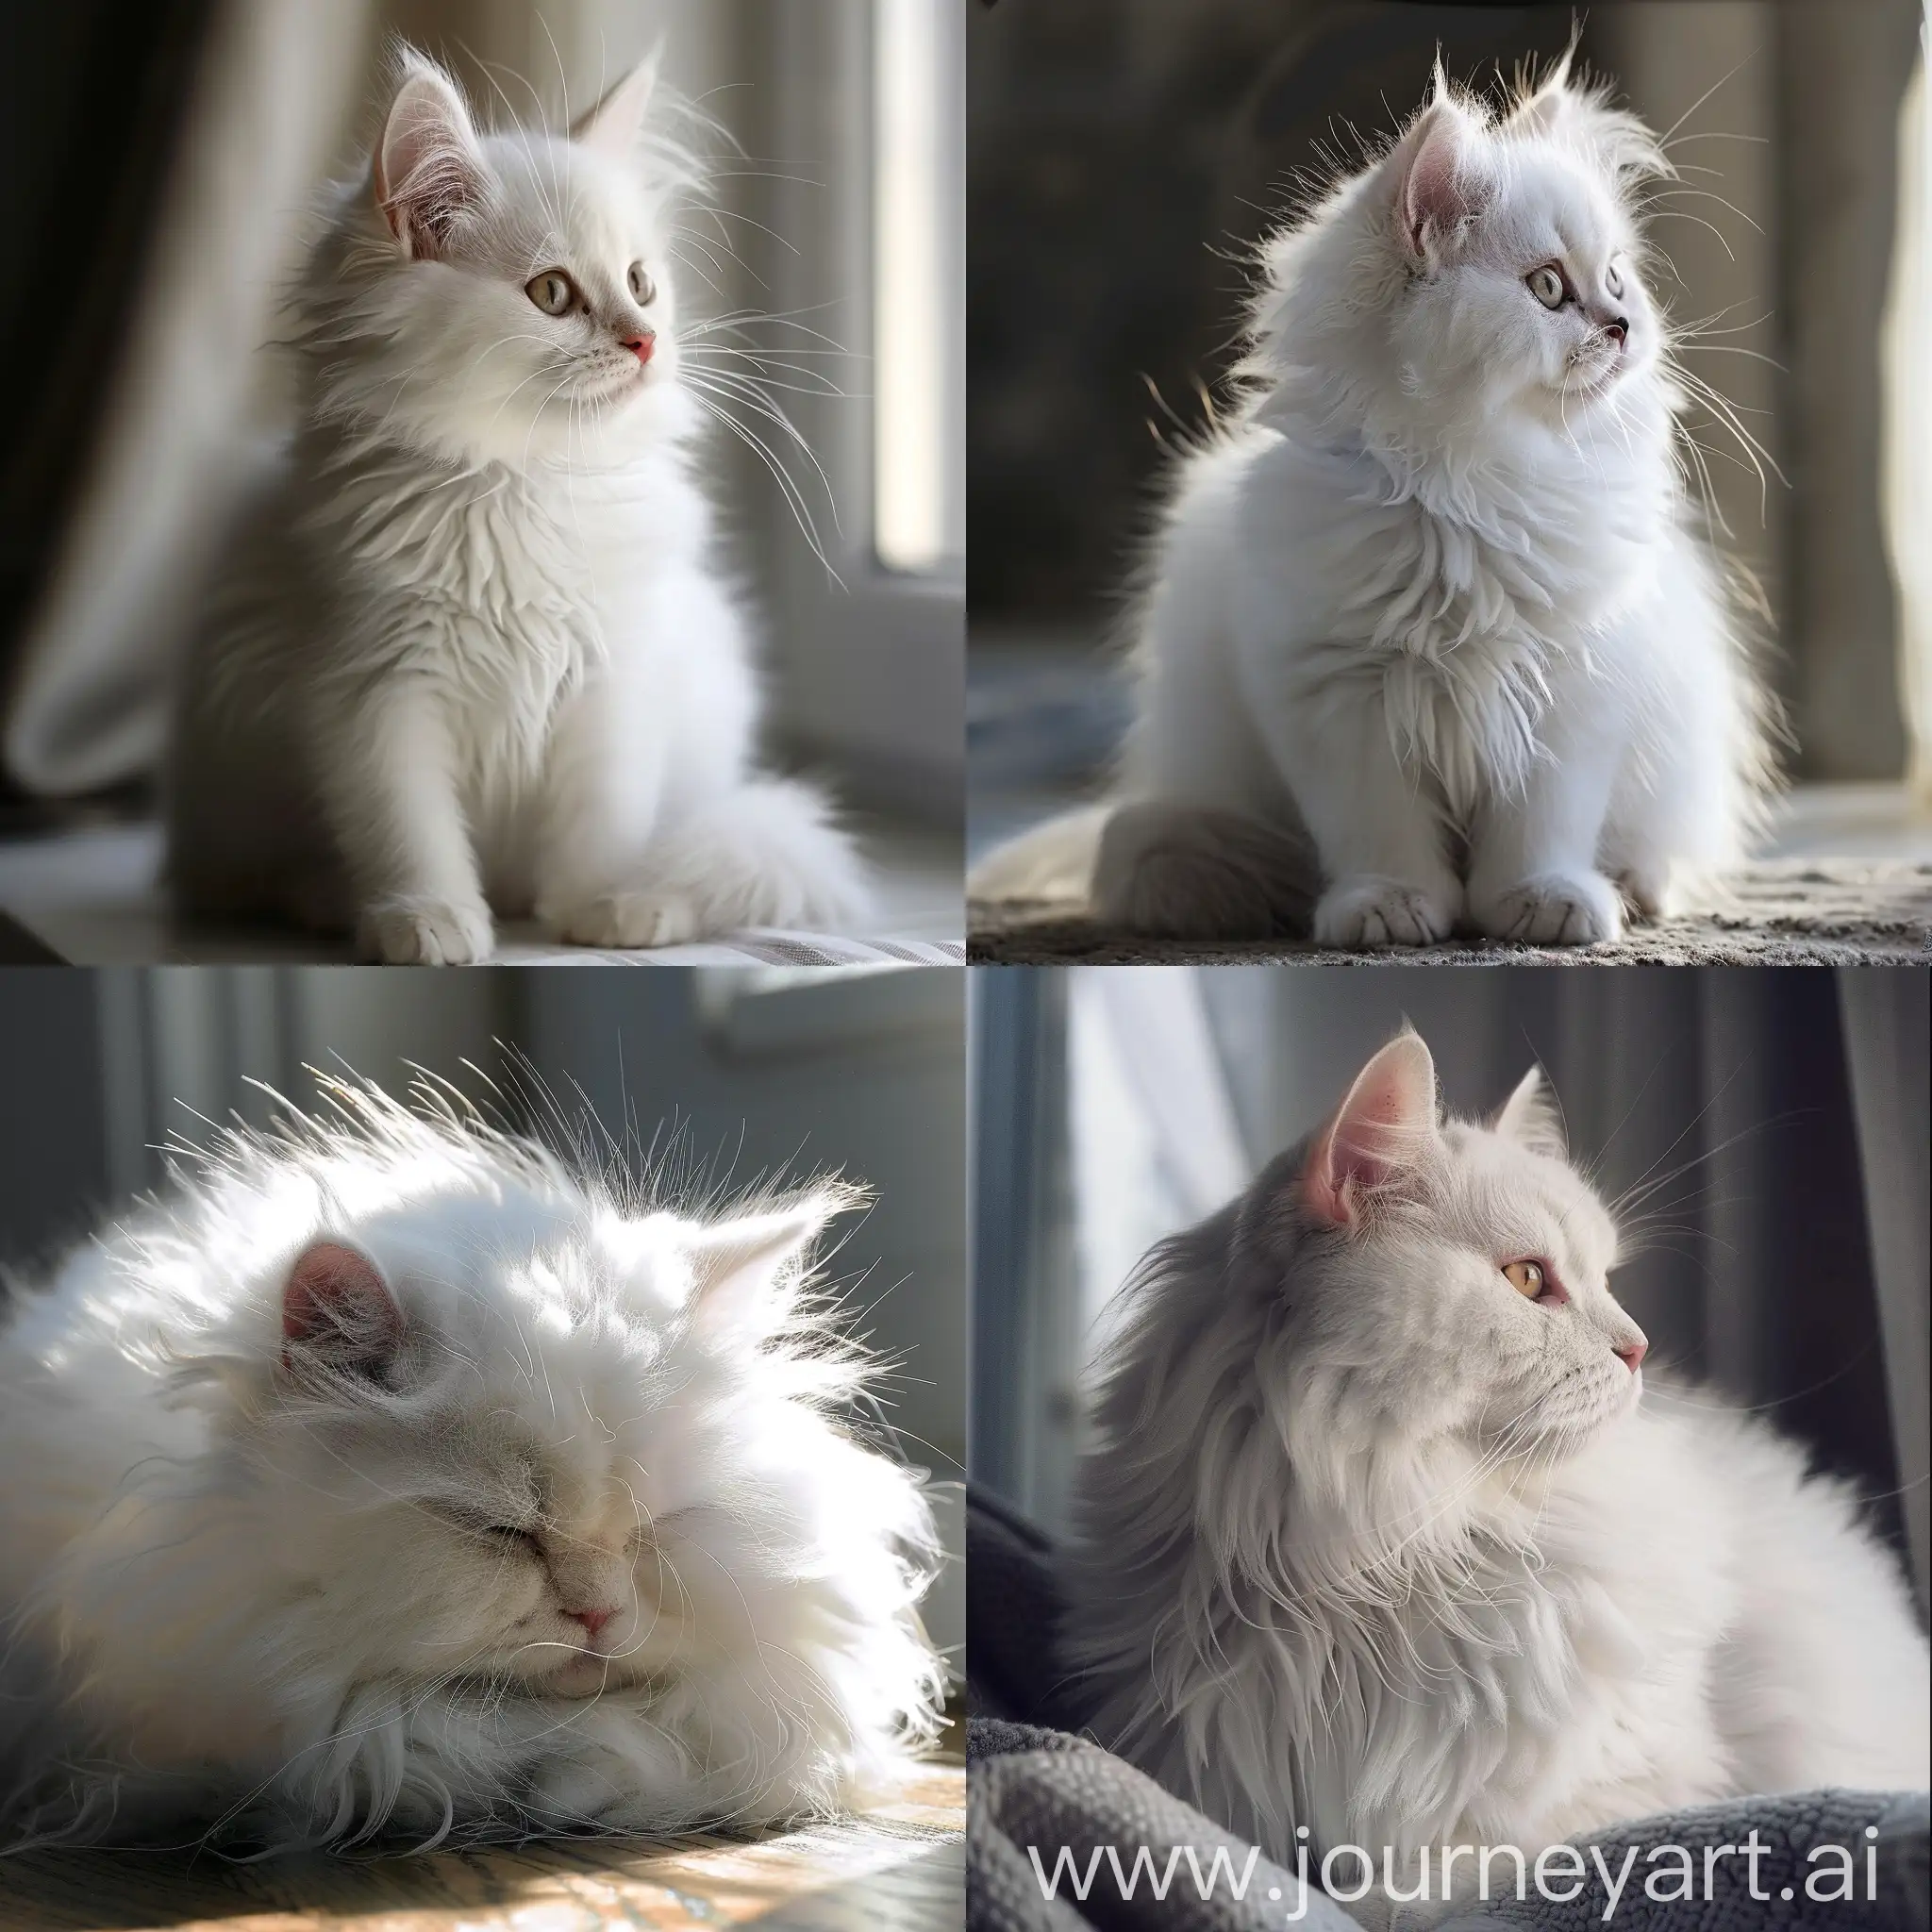 Adorable-White-Fluffy-Kitty-with-Playful-Demeanor